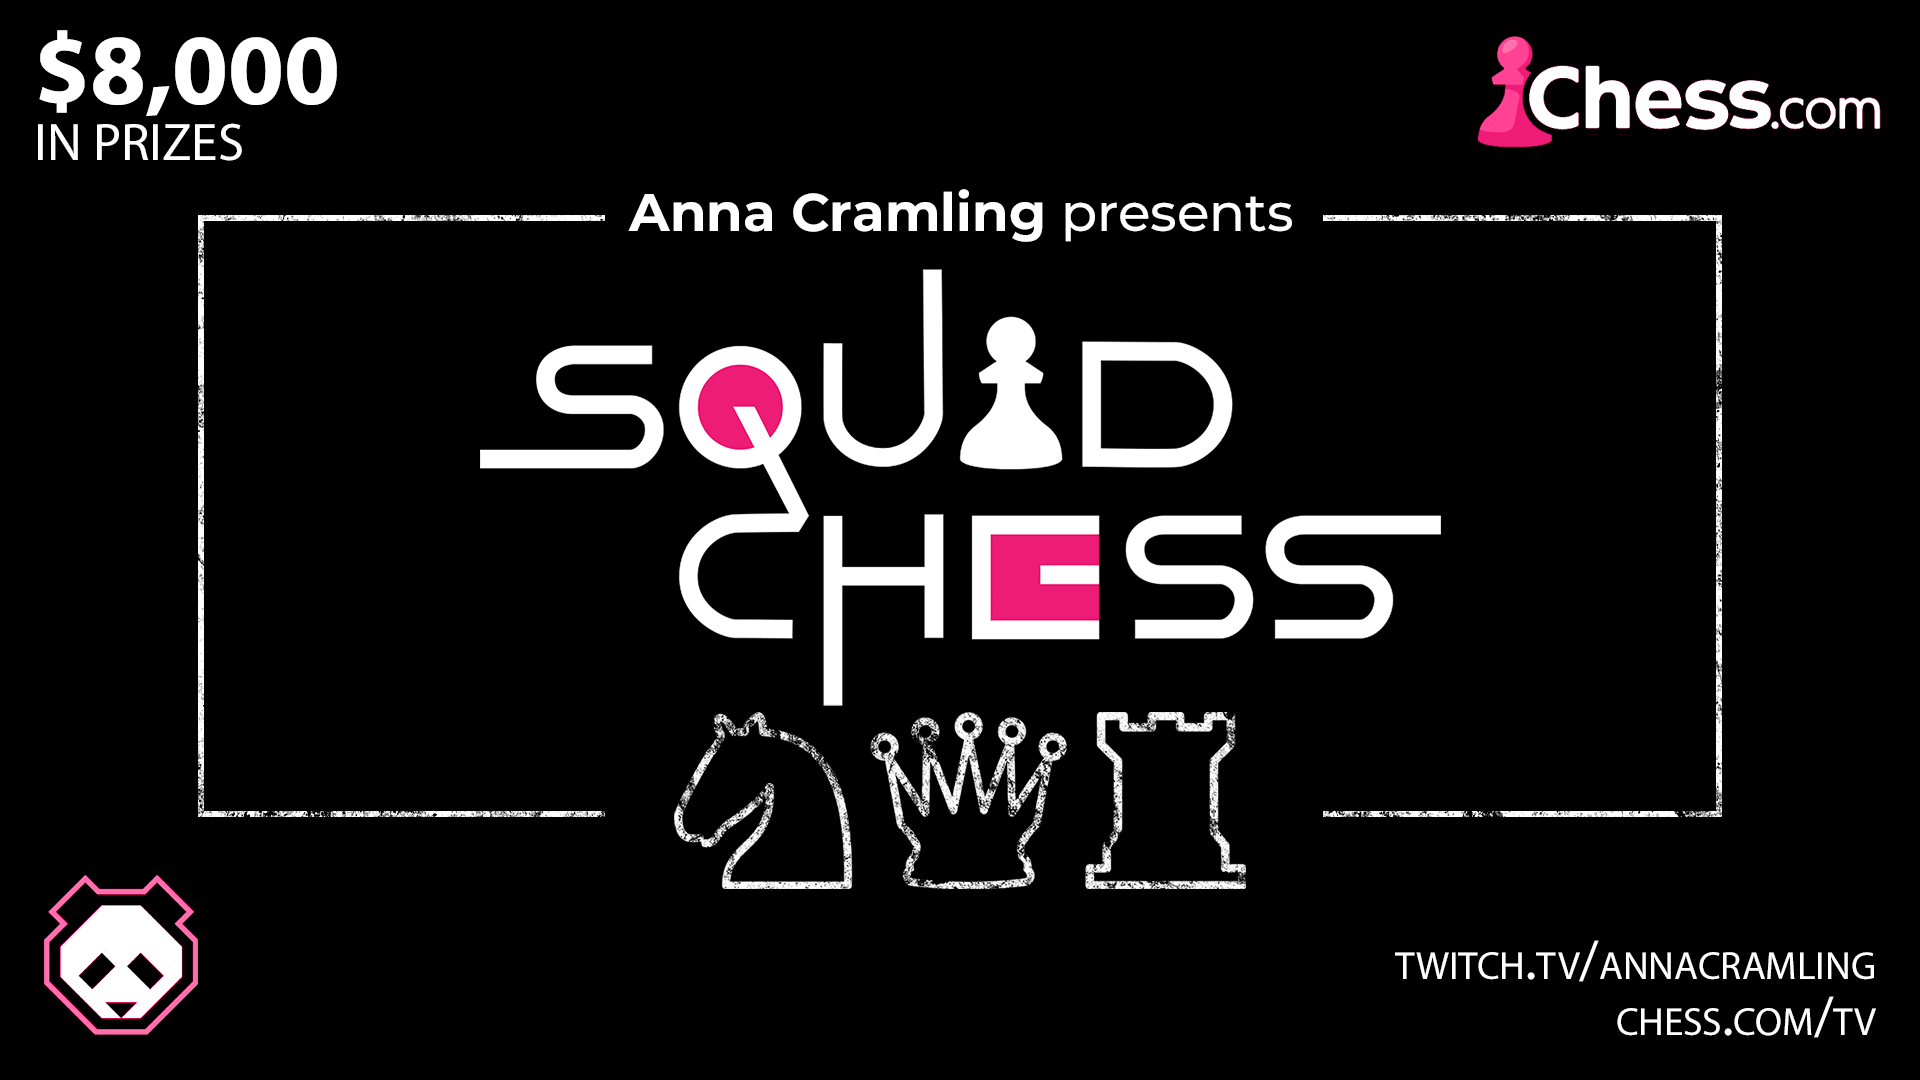 Discover Anna Cramling (Chess Player): Cow Opening, Chess, Twitch